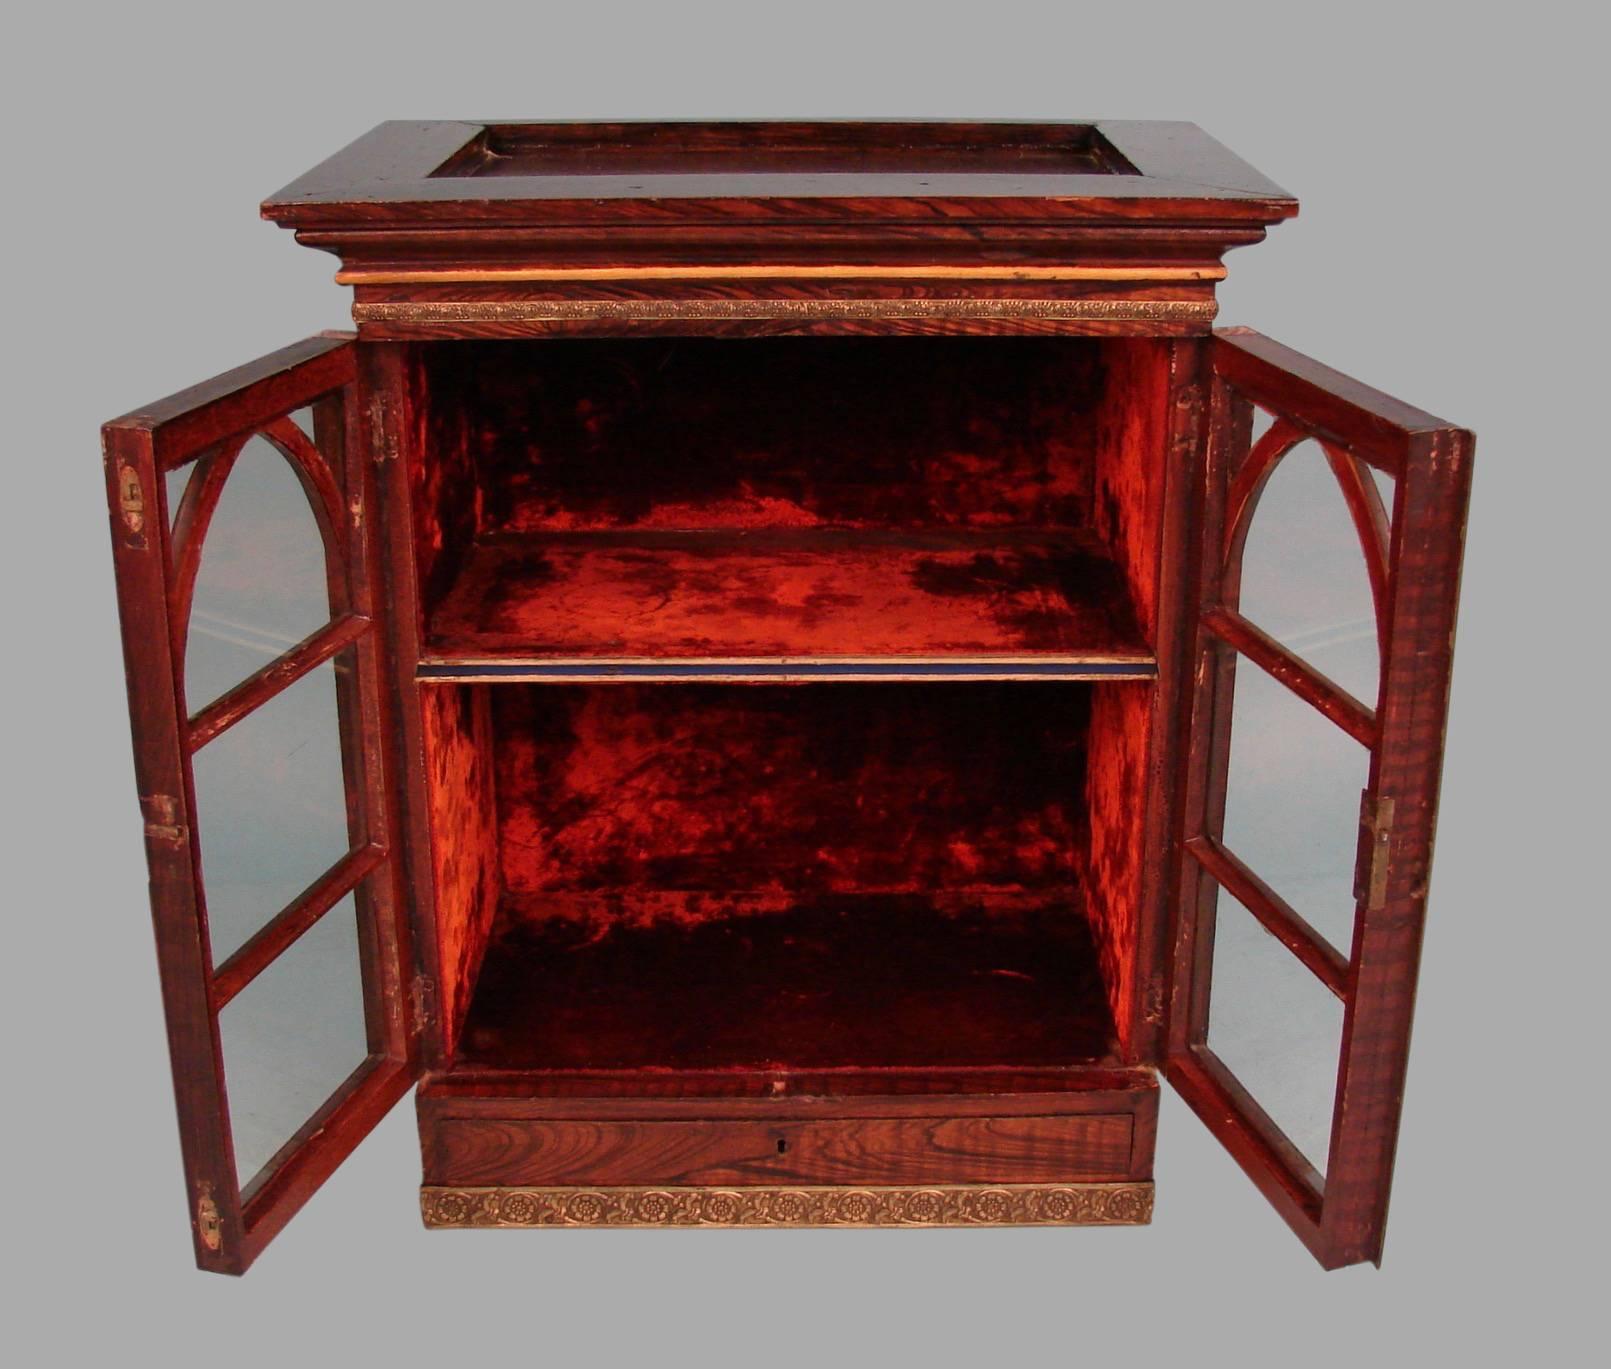 An English 19th century grained-painted table cabinet, the cornice resting above two Gothic style astragal glazed doors concealing a velvet lined interior with one shelf, the base fitted with a single narrow drawer. The piece is banded with gilt